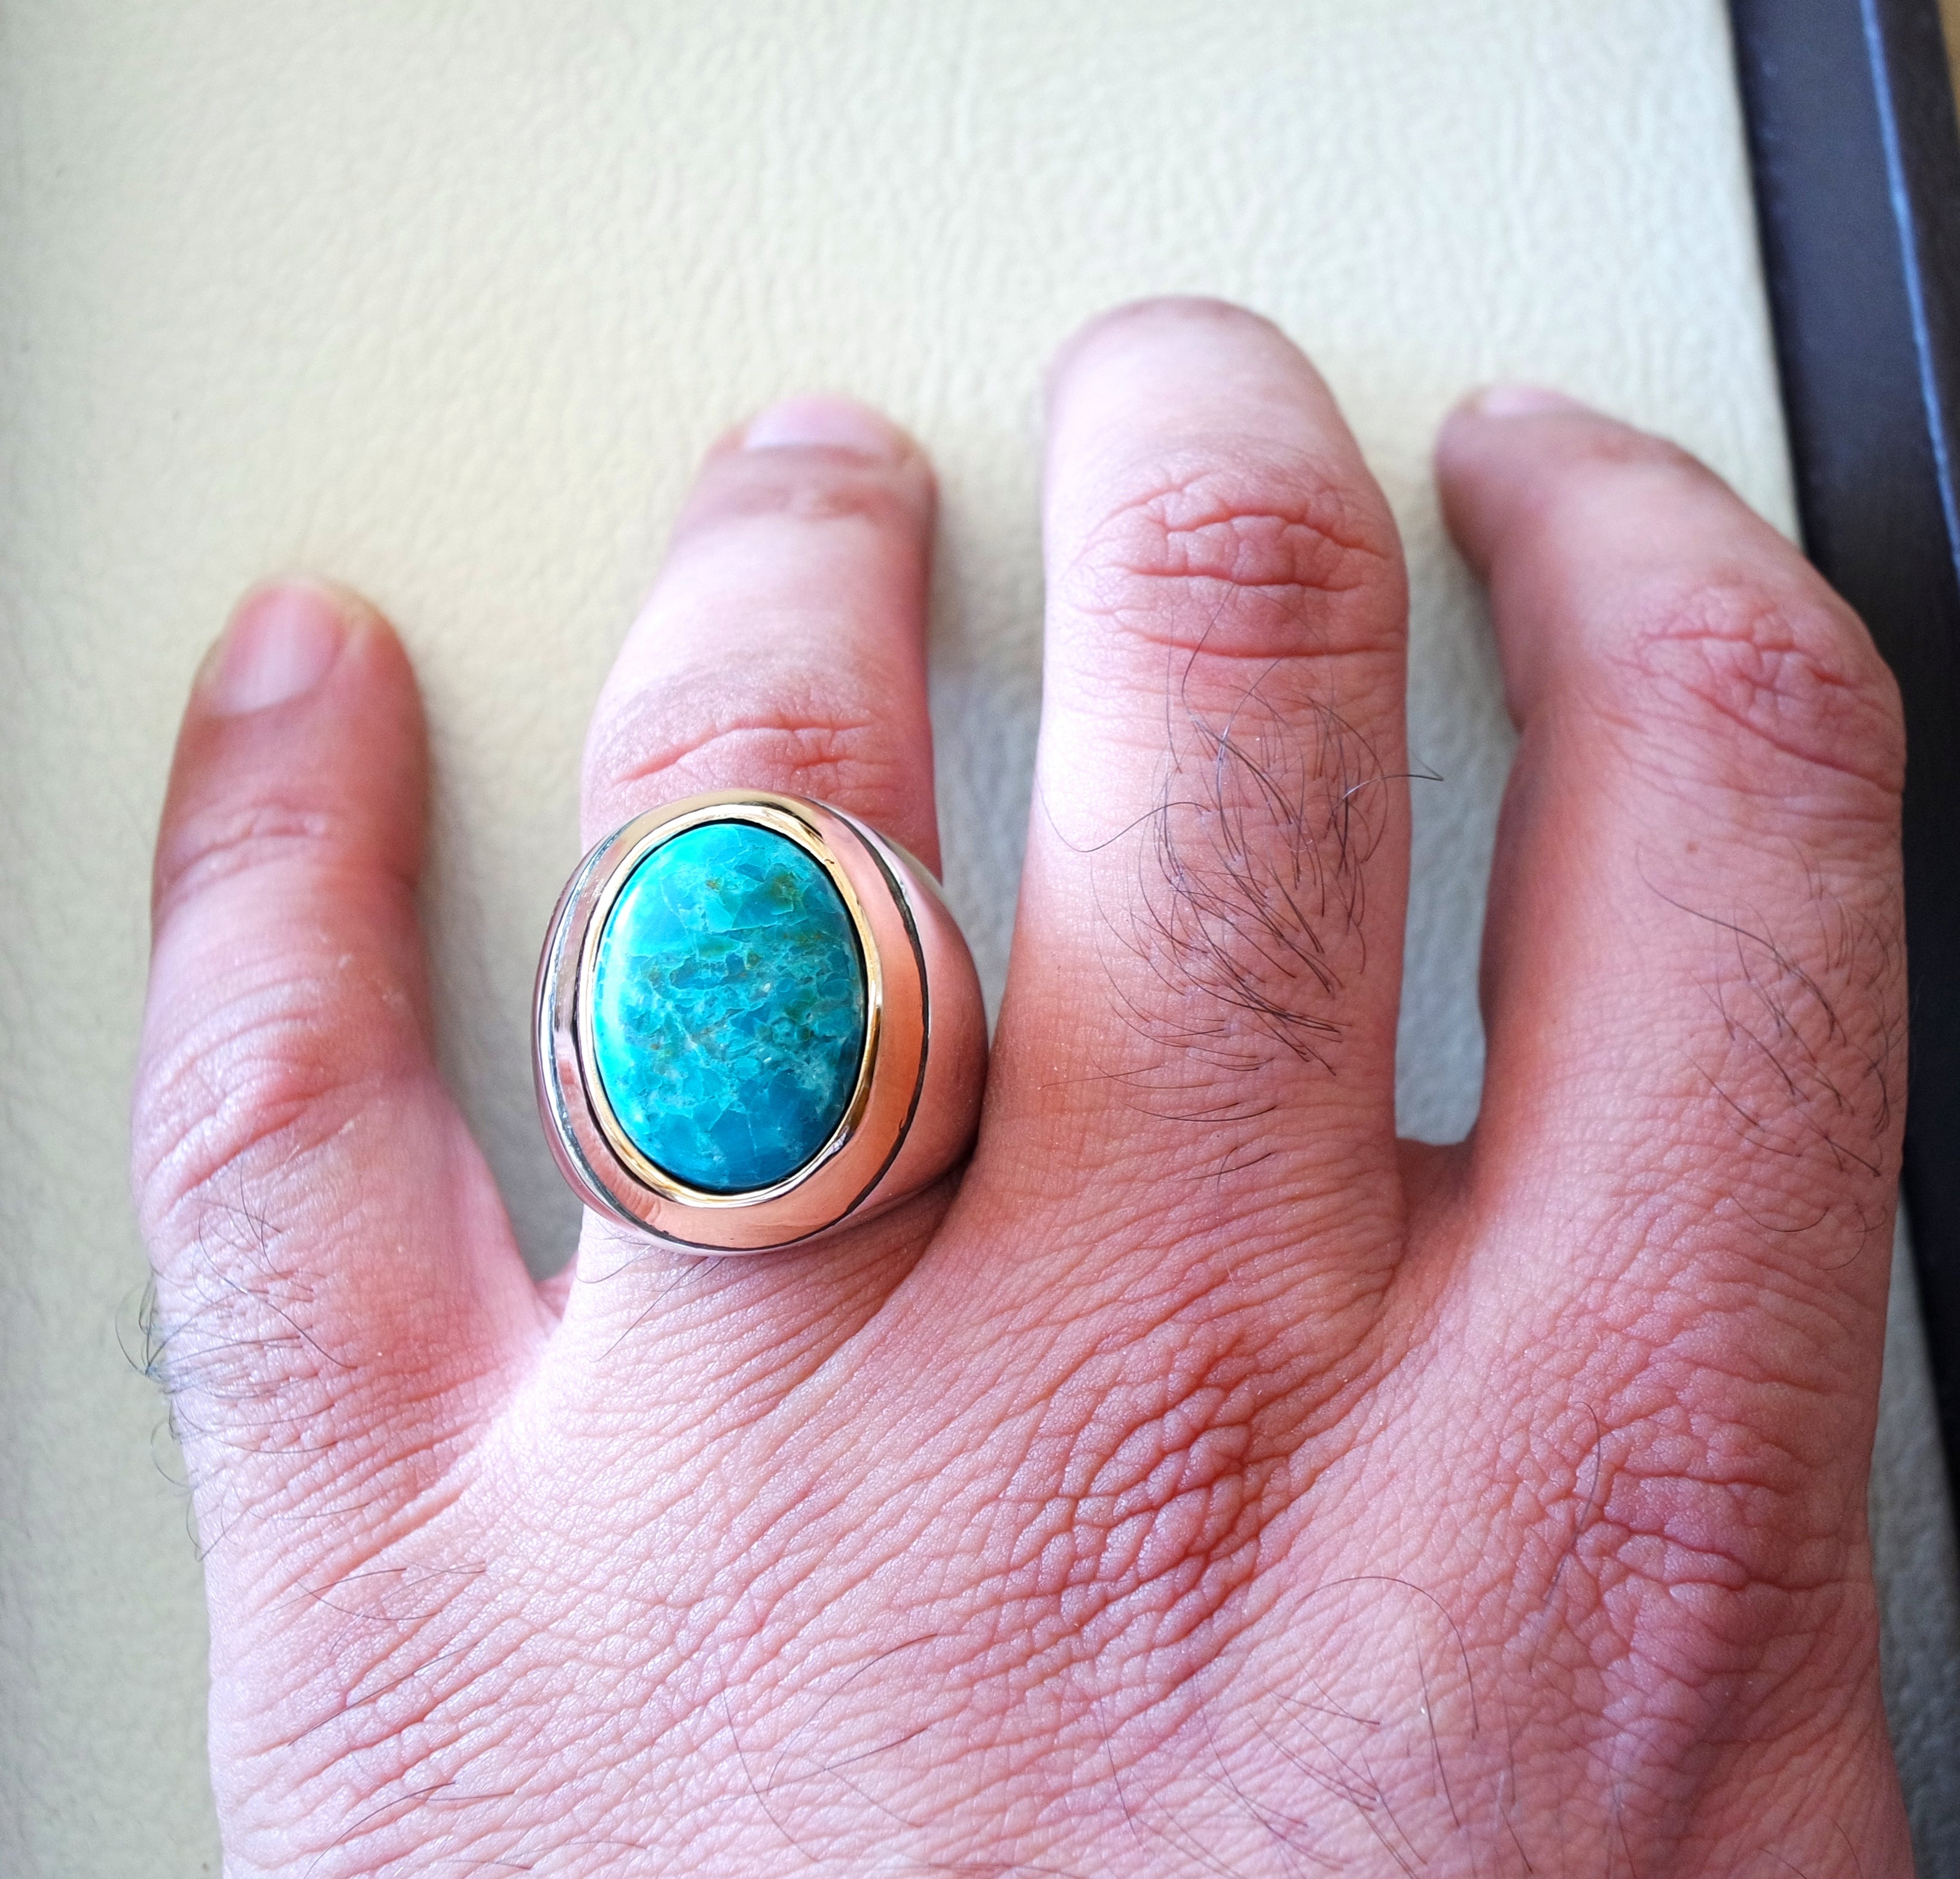 man ring chryscolla natural stone sterling silver 925 and bronze oval cabochon semi precious blue gem ottoman arabic style all sizes jewelry